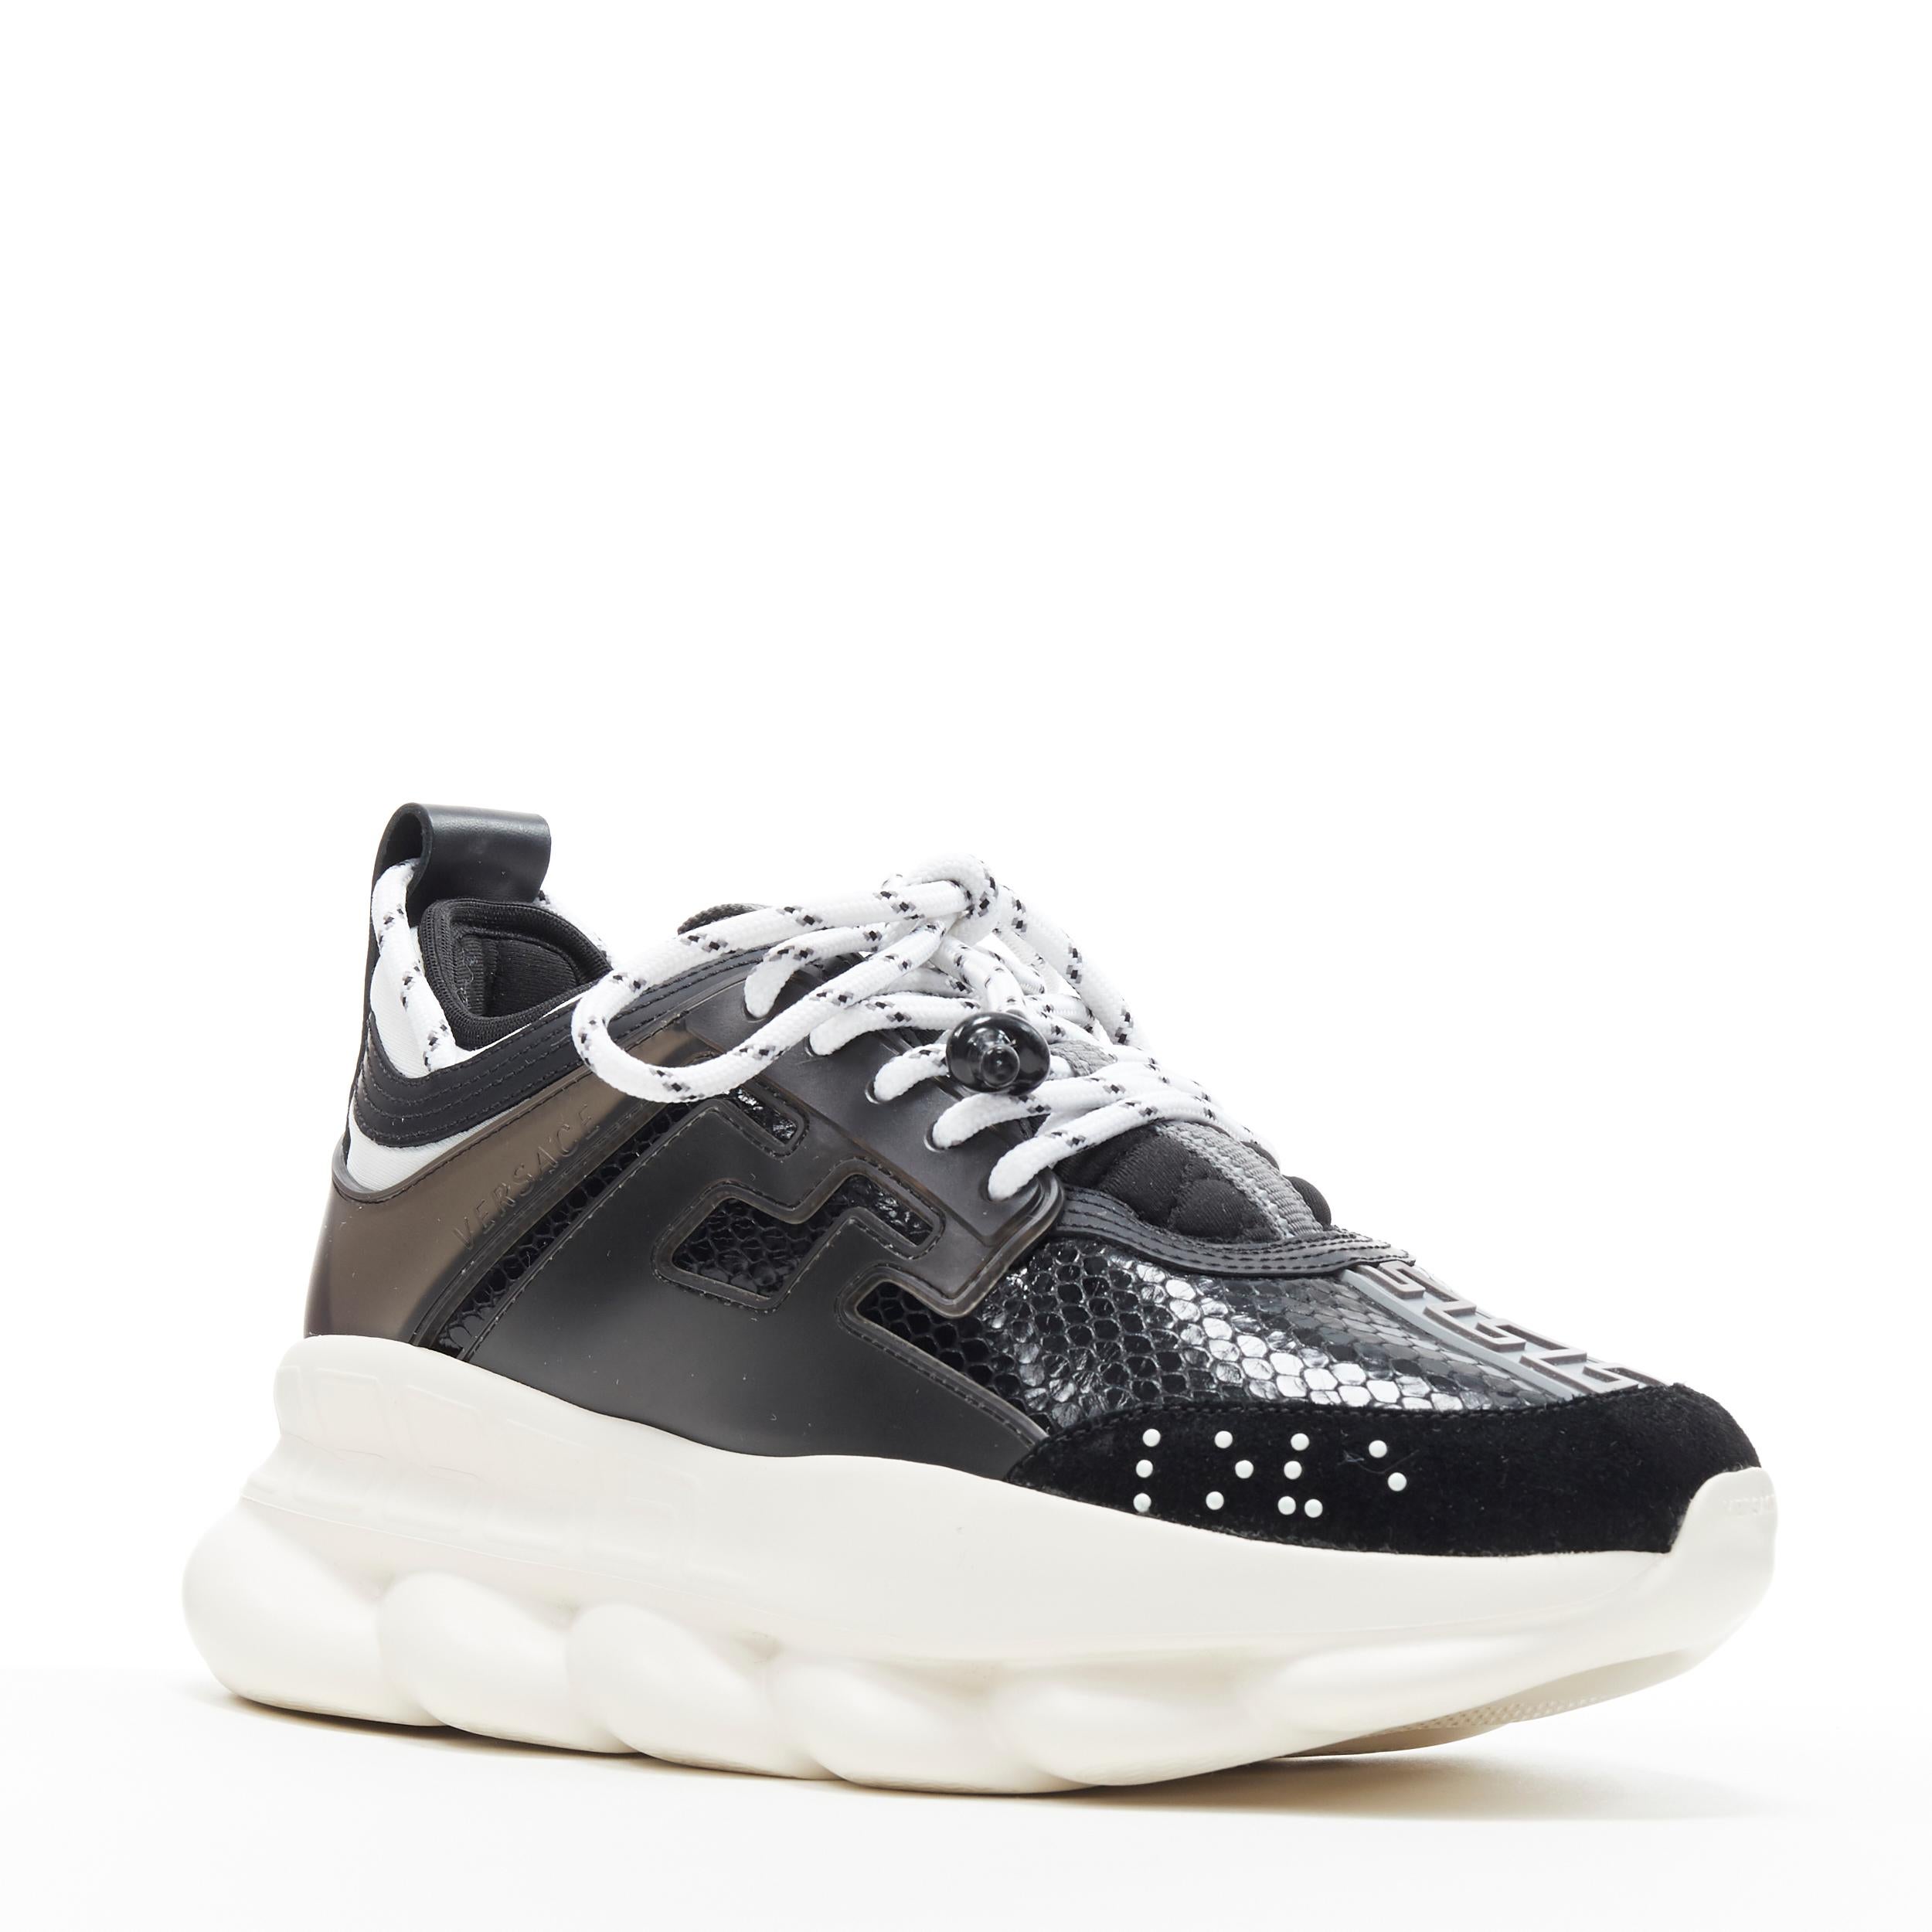 new VERSACE Chain Reaction Black glossy snake low chunky dad sneaker EU39 US9 Reference: TGAS/A06330 
Brand: Versace 
Designer: Salehe Bembury 
Model: Chain Reaction Black Python 
Material: Leather 
Color: Black 
Pattern: Snakeskin 
Closure: Lace up